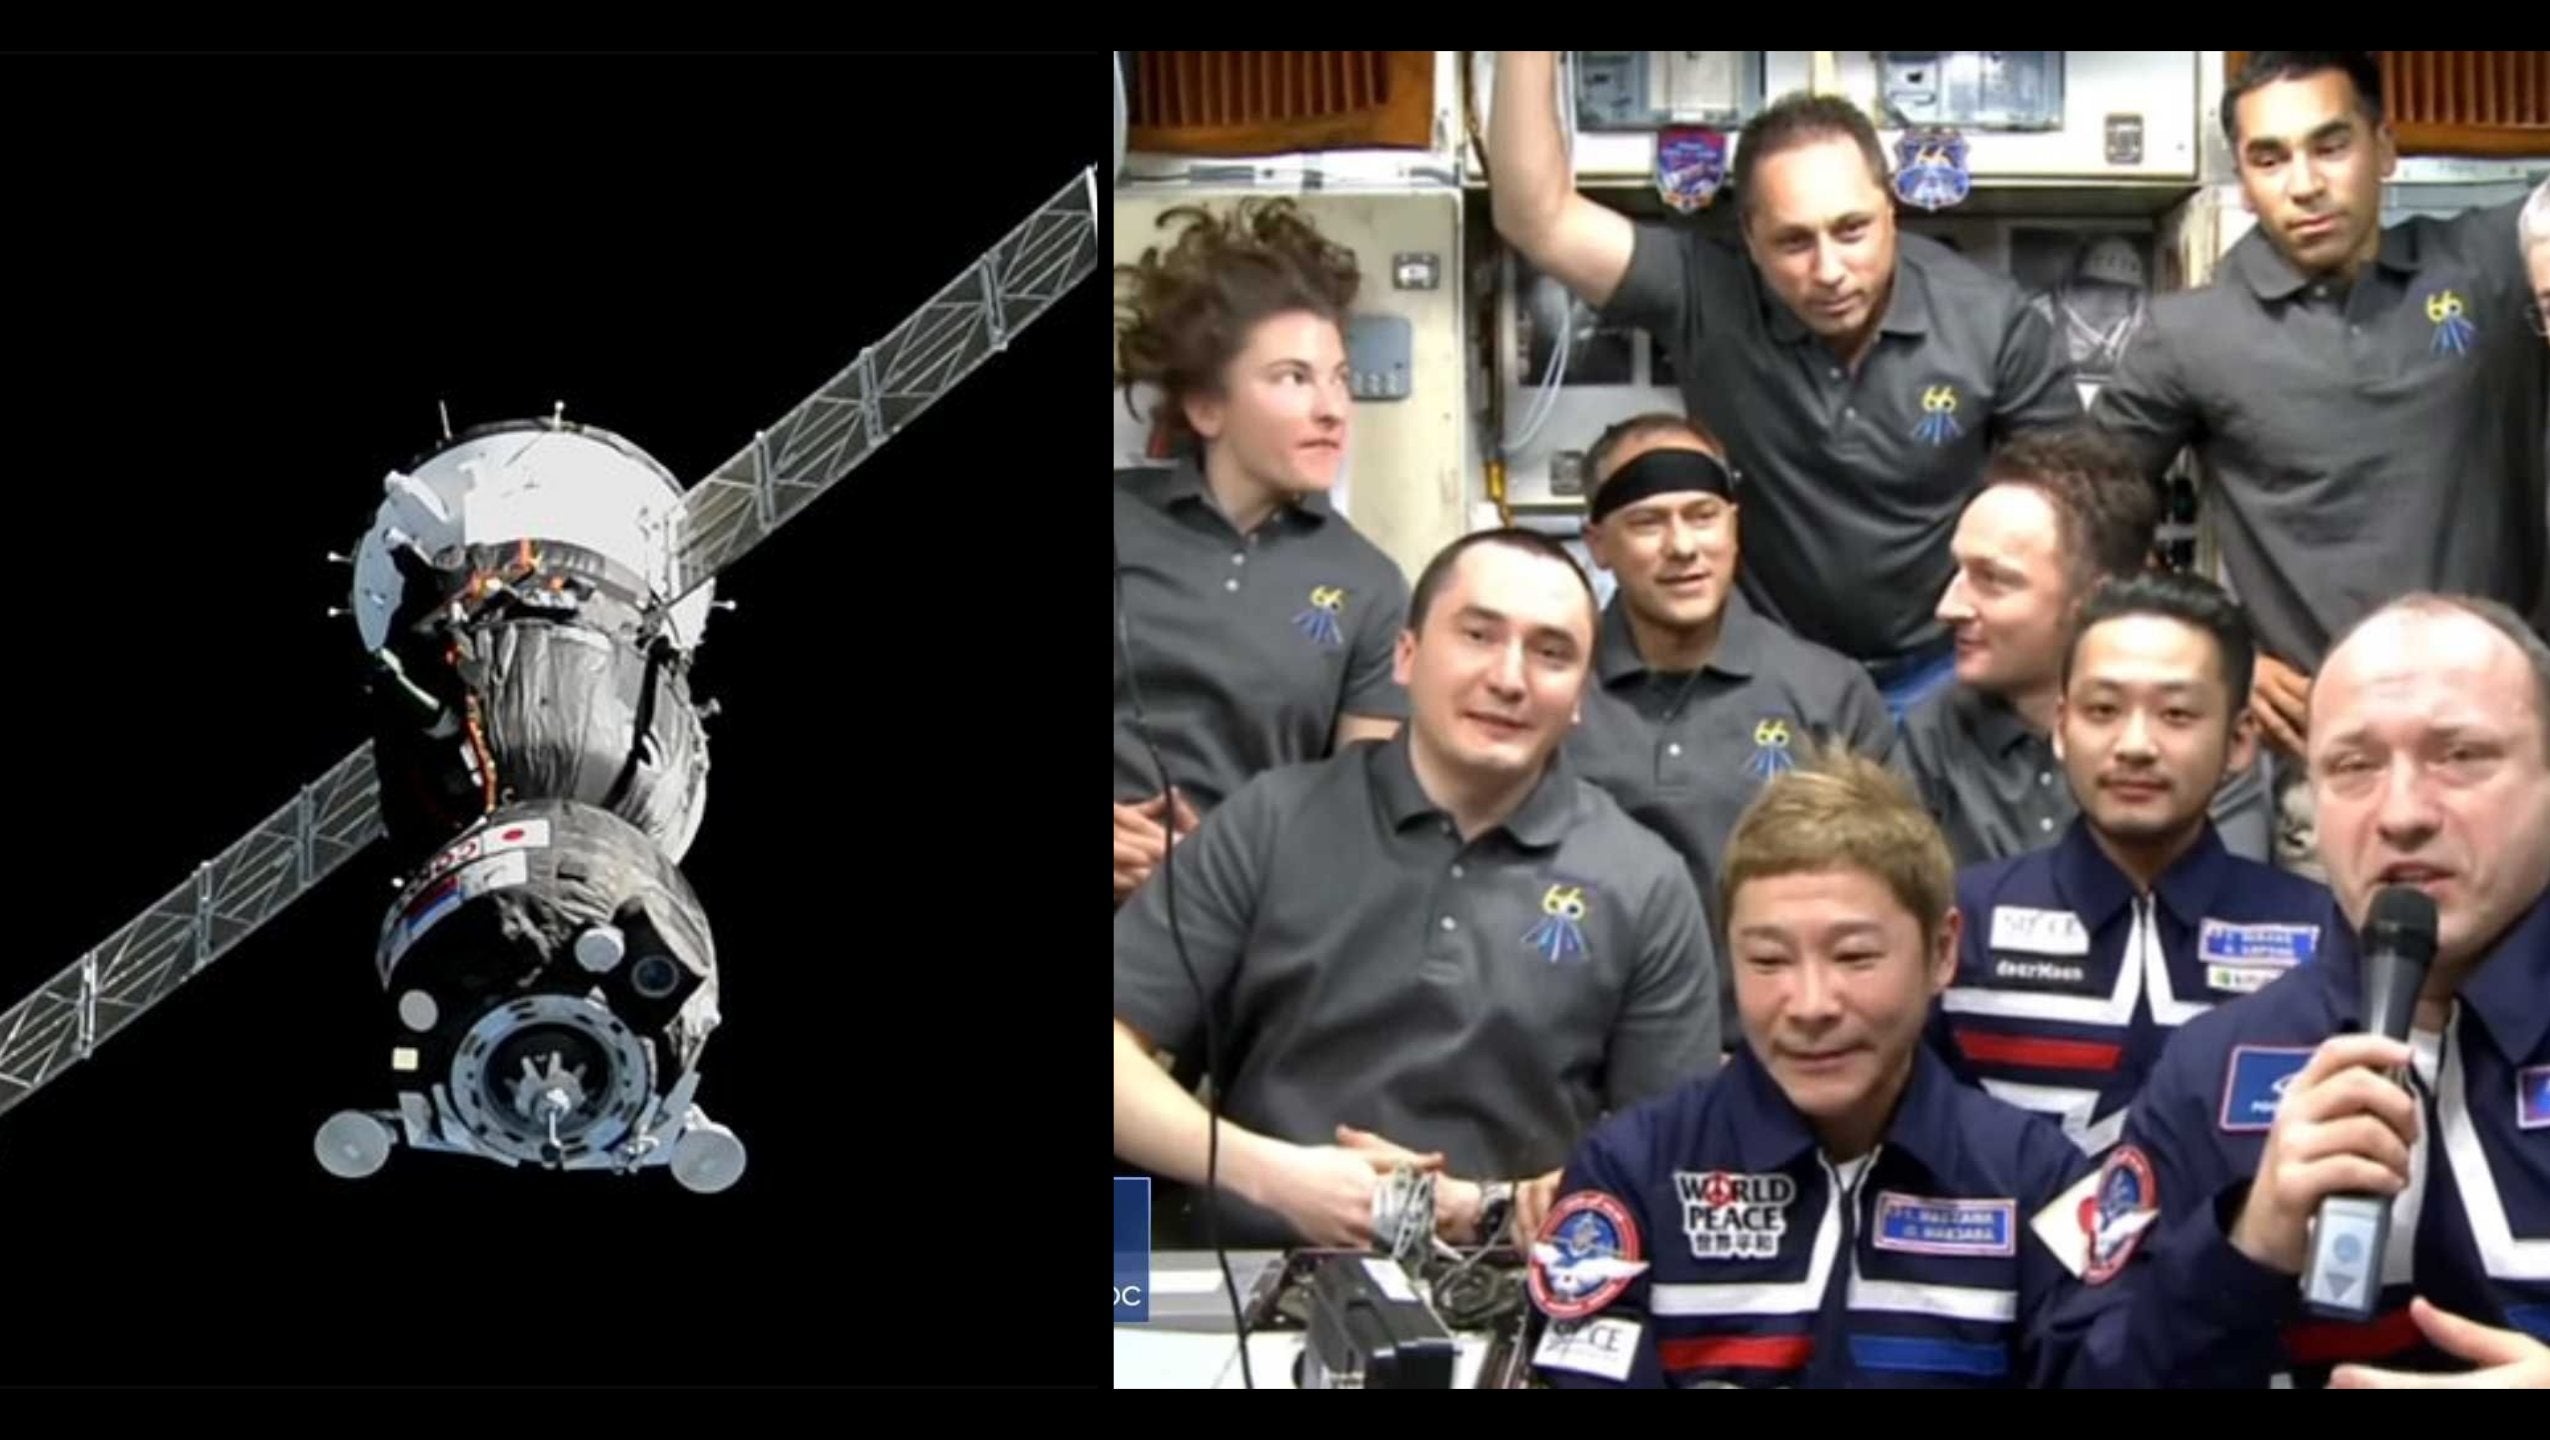 Yusaku Maezawa Arrives To The Space Station Aboard Russia’s Soyuz, Meets SpaceX Crew-3 Astronauts